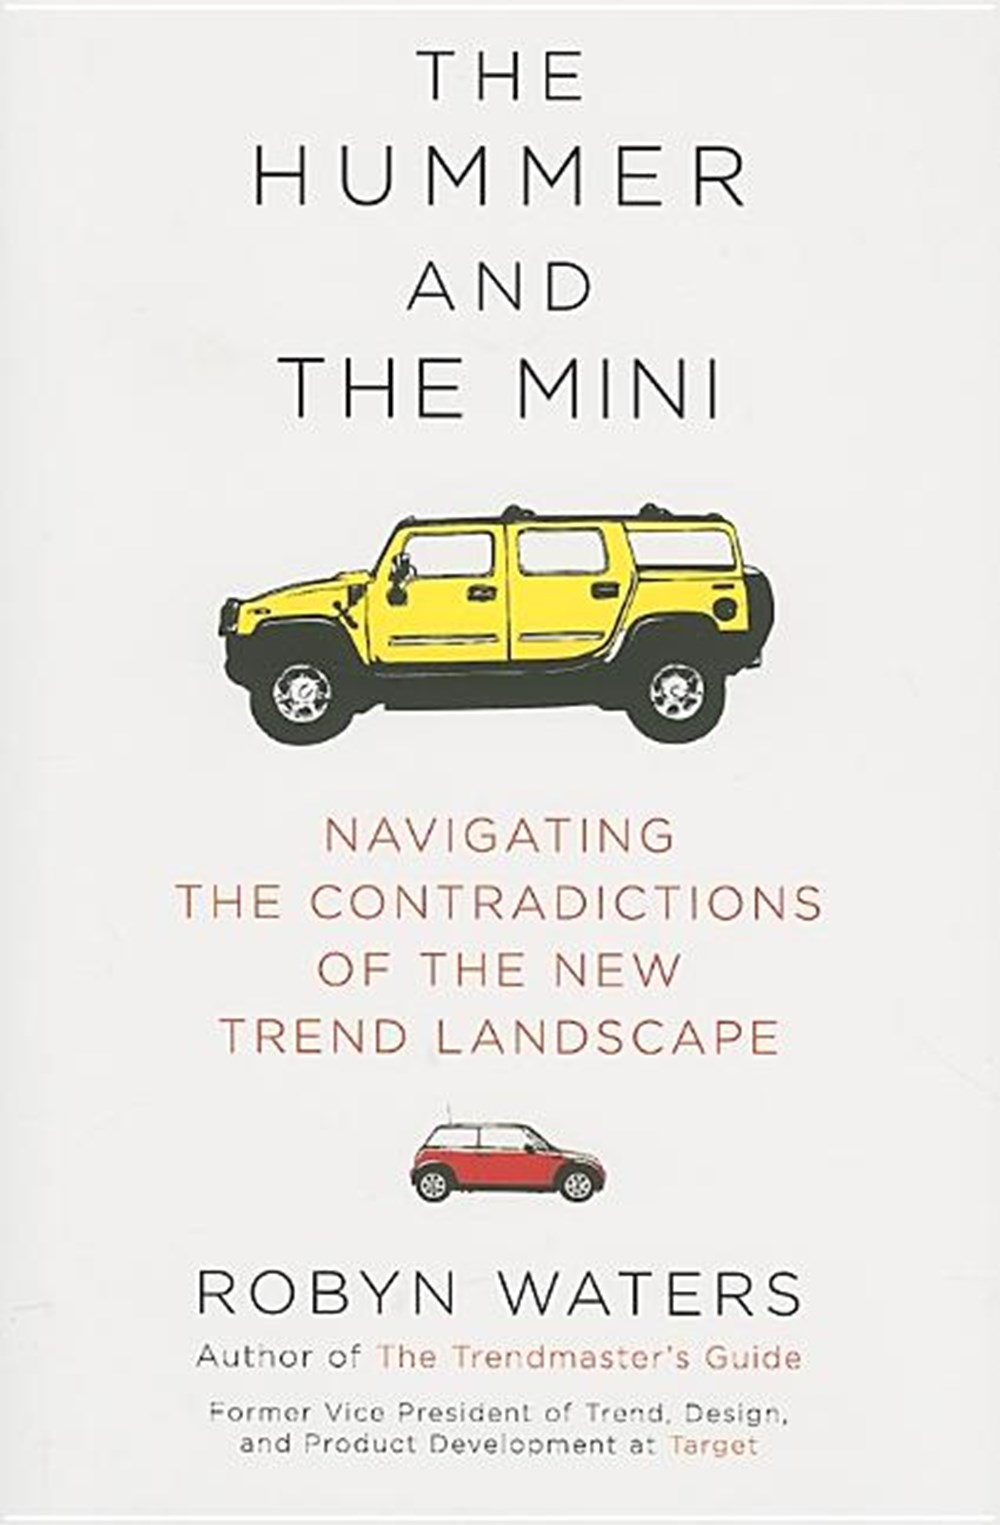 Hummer and the Mini: Navigating the Contradictions of the New Trend Landscape